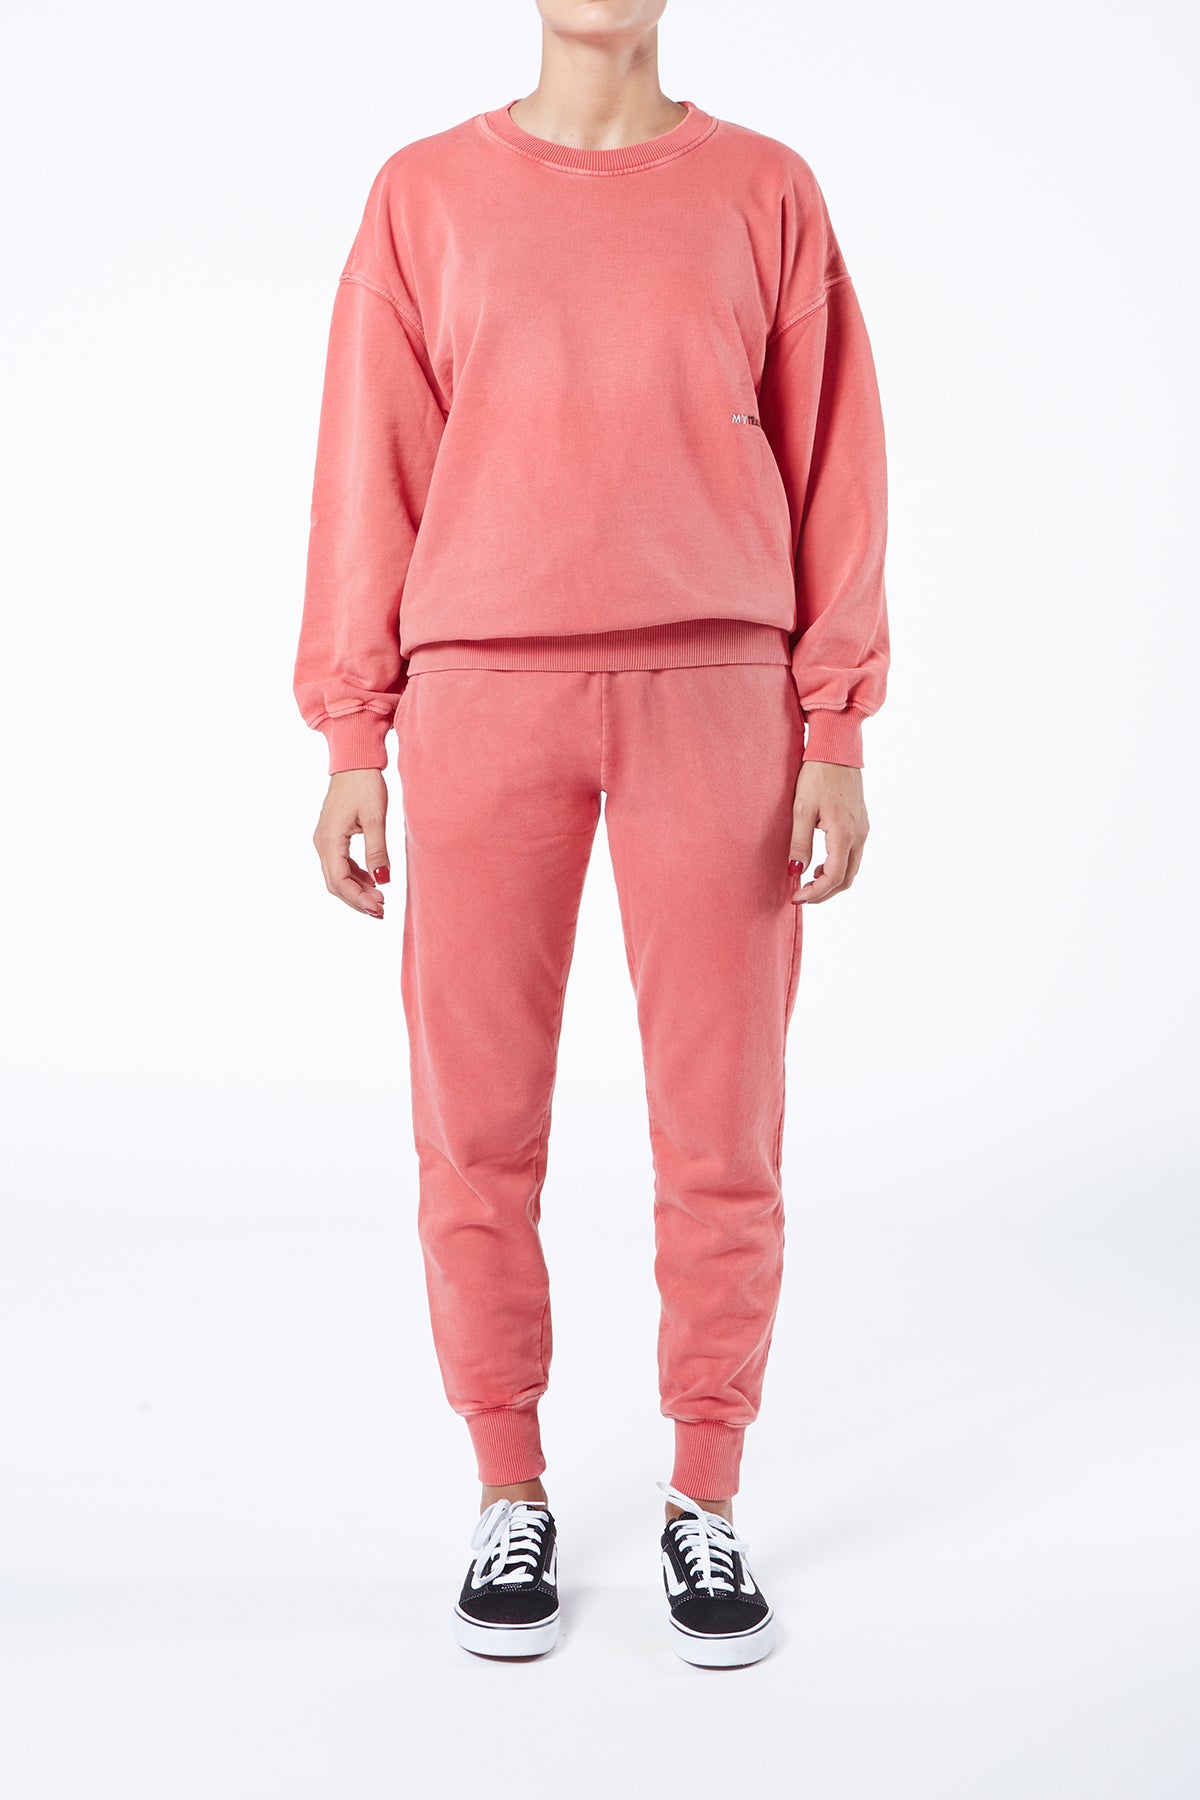 MYTRACKSUIT - CREWNECK SWEATER/RIBBED BAND PANTS RED